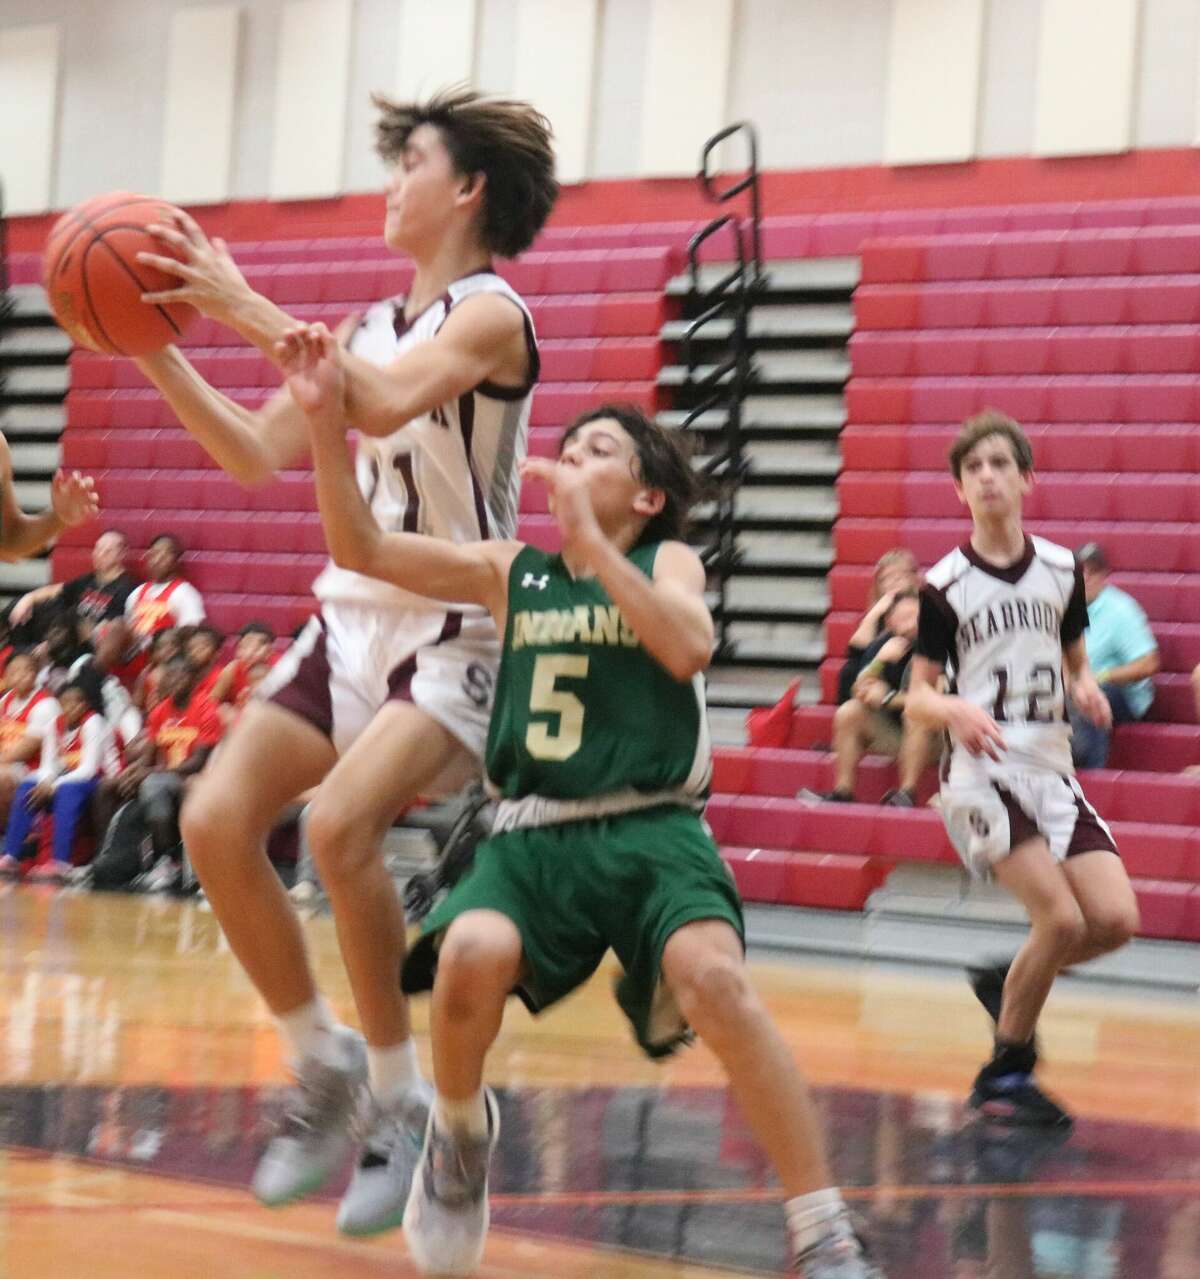 Seabrook Intermediate's Jordan Foret receives a pass against some tight Santa Fe defense at San Jacinto Intermediate School Friday night. Foret had 13 points, two assists during a second-half comeback. Looking on is Nicholas Groenueld.